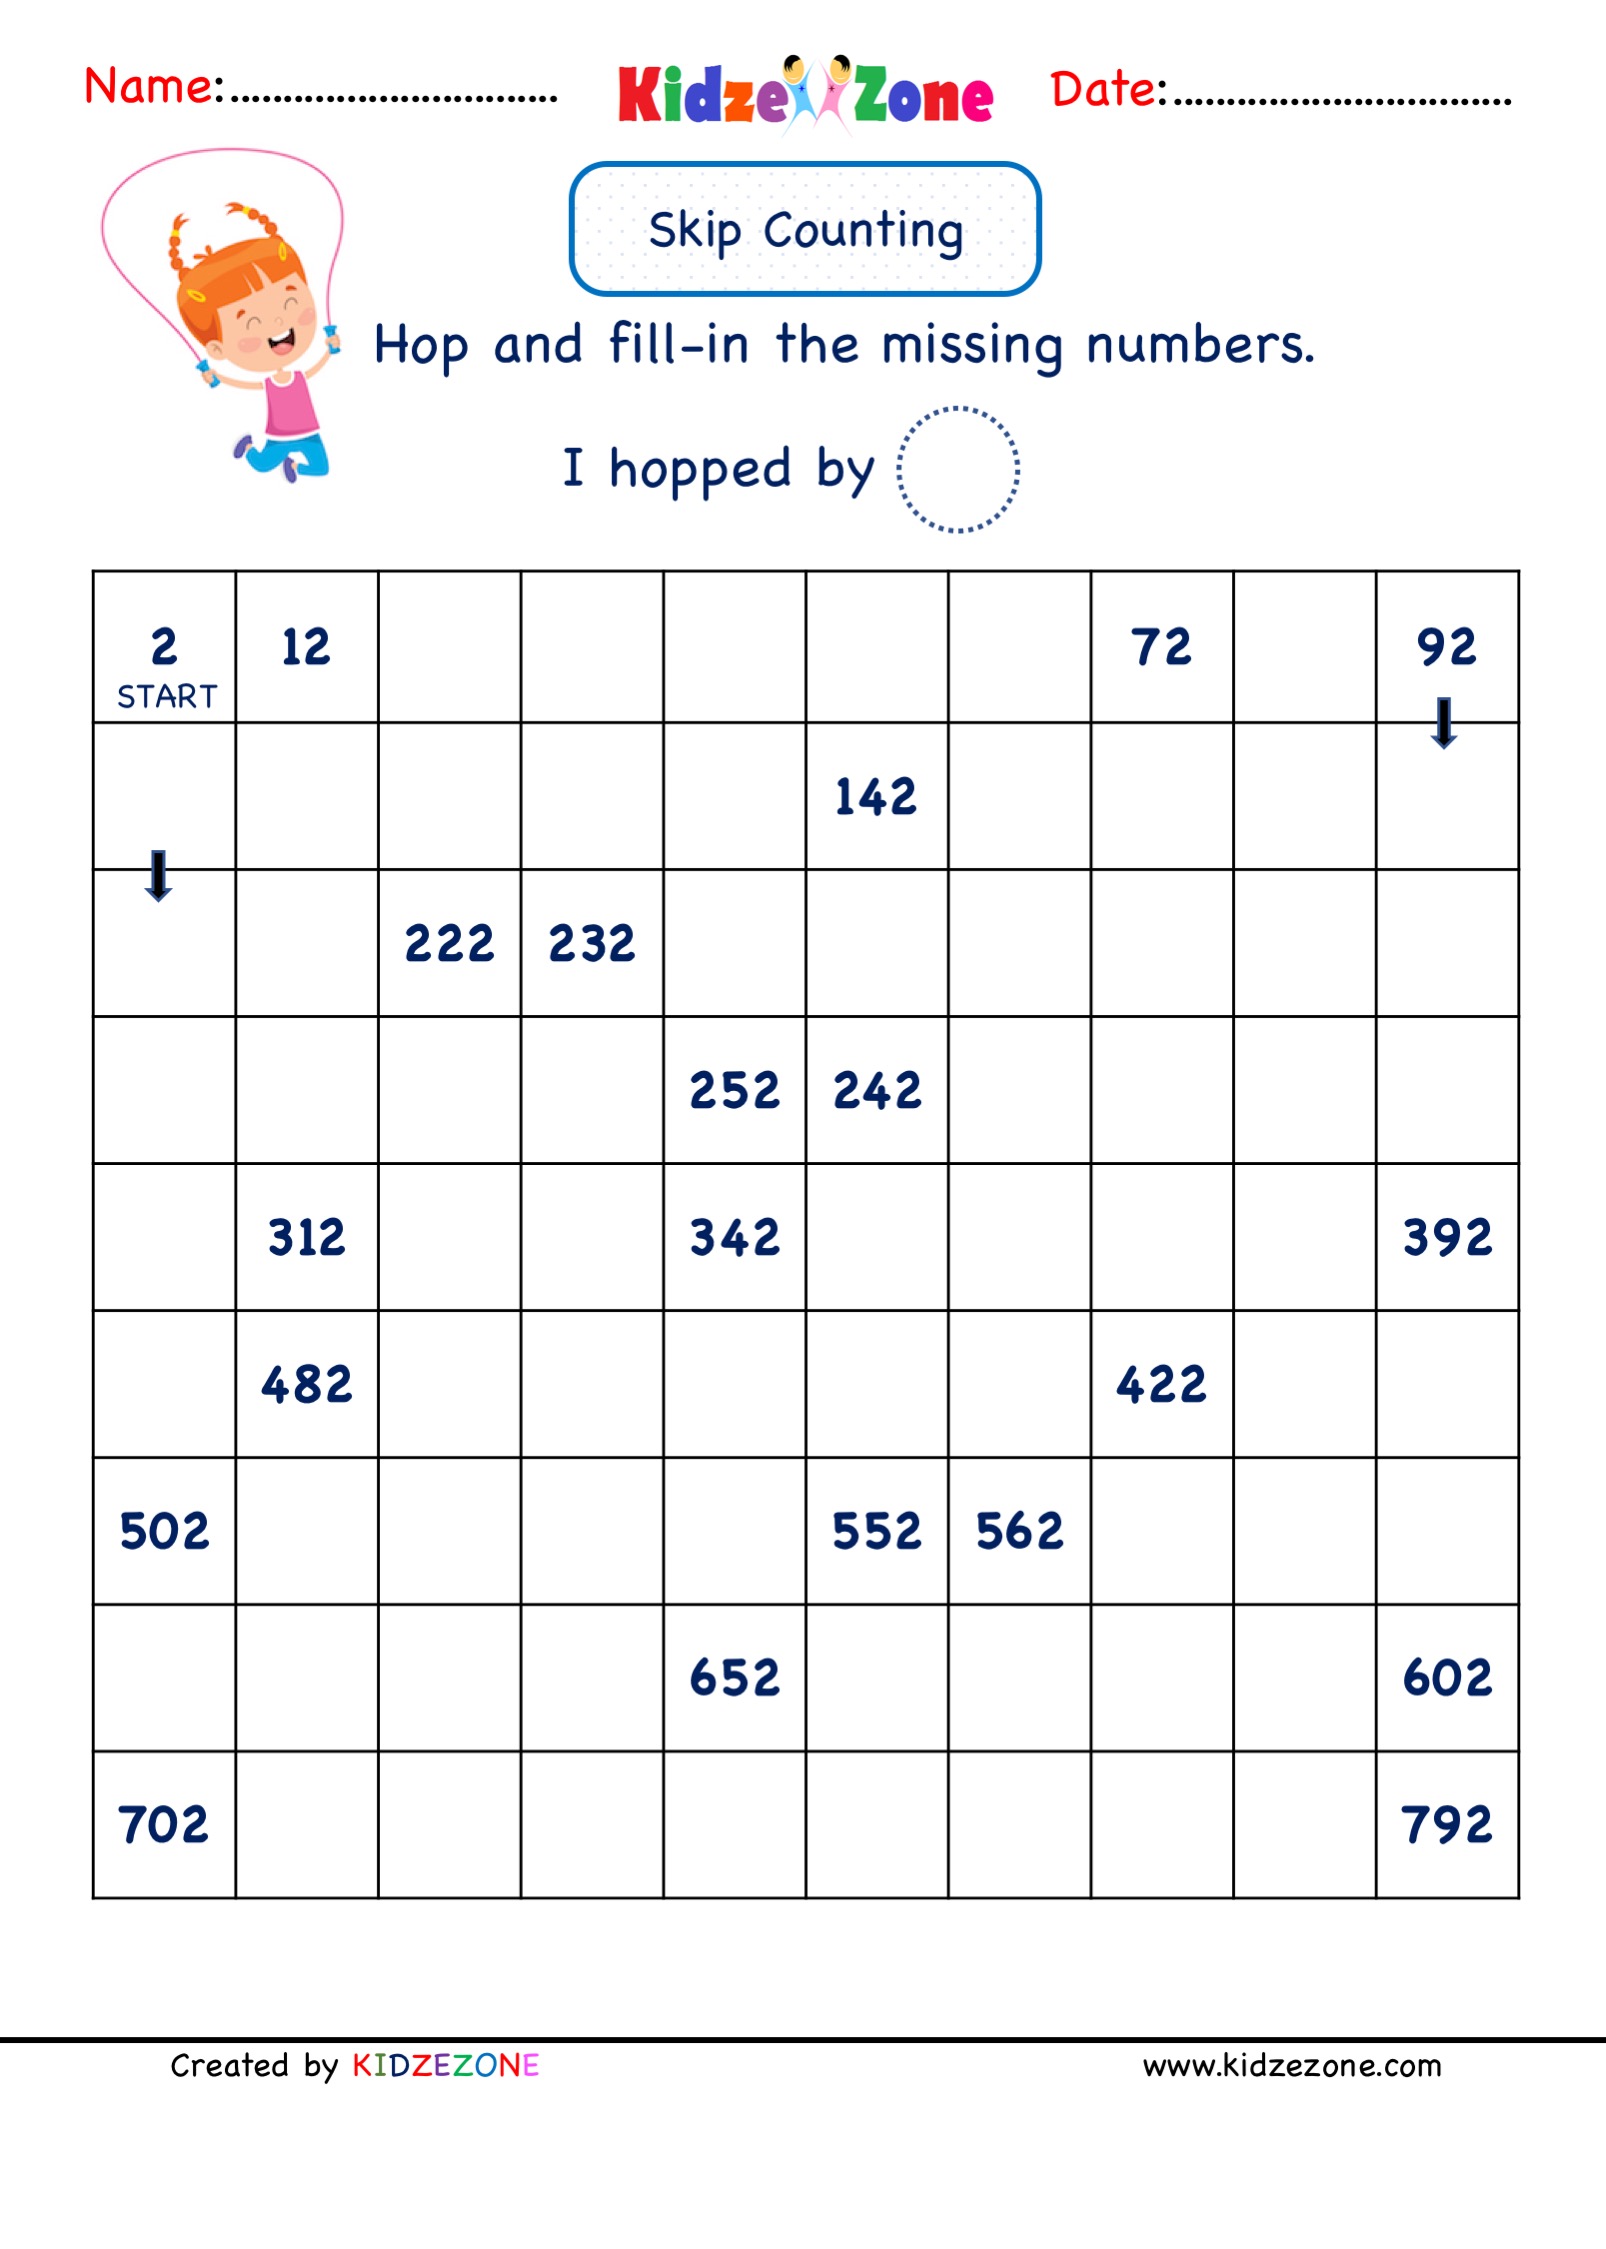 Second Grade Math skip counting by 20 practice worksheet Regarding Counting In 10s Worksheet